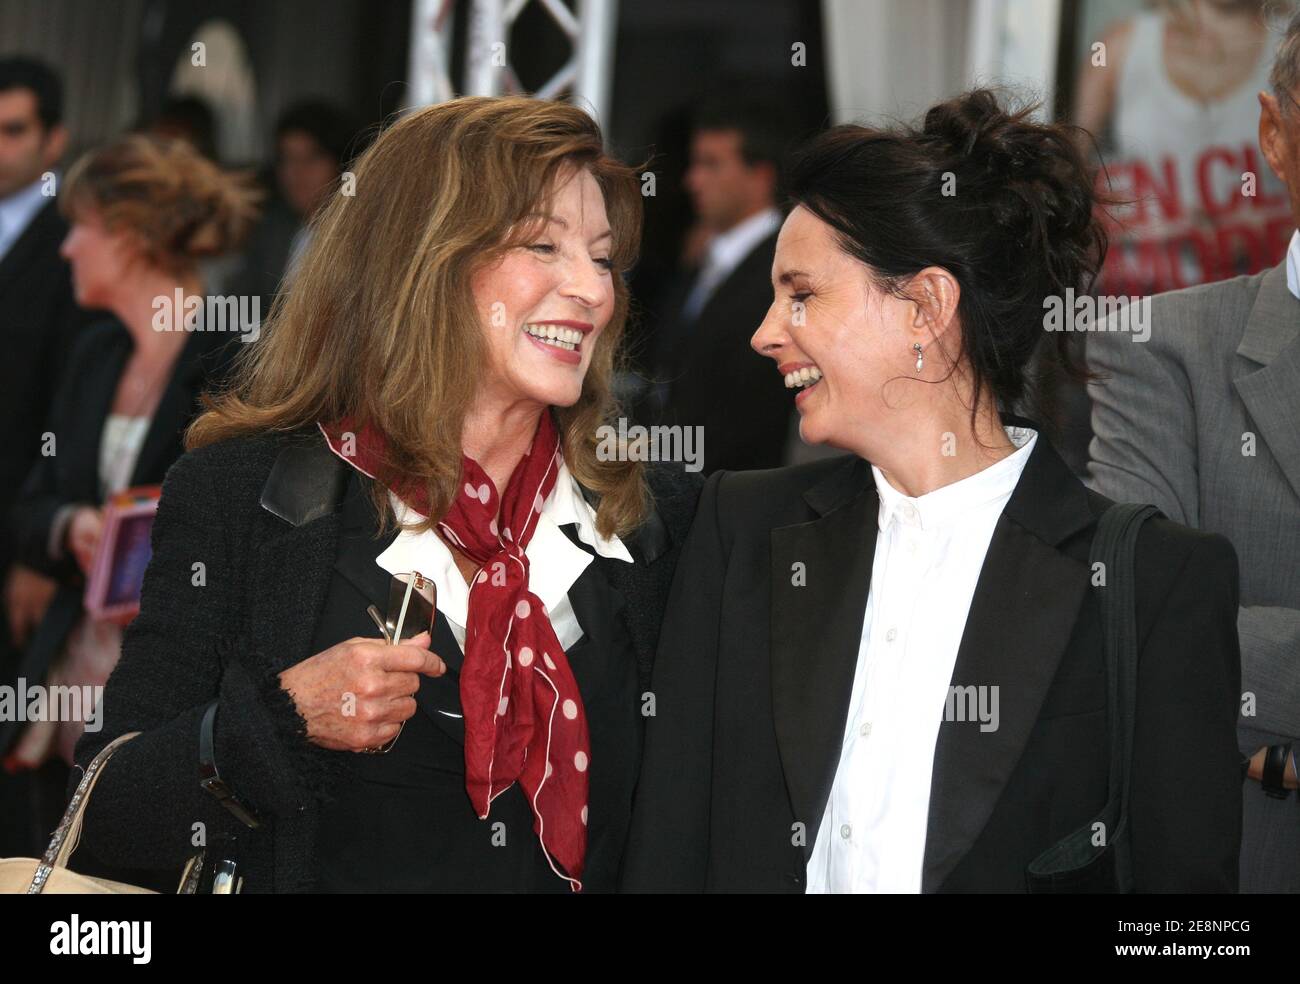 Jury's members Marie-France Pisier and Anouk Grinberg attend the screening of 'Michael Clayton' as part of the 33rd American Film Festival in Deauville, France, on September 2, 2007. Photo by Denis Guignebourg/ABACAPRESS.COM Stock Photo